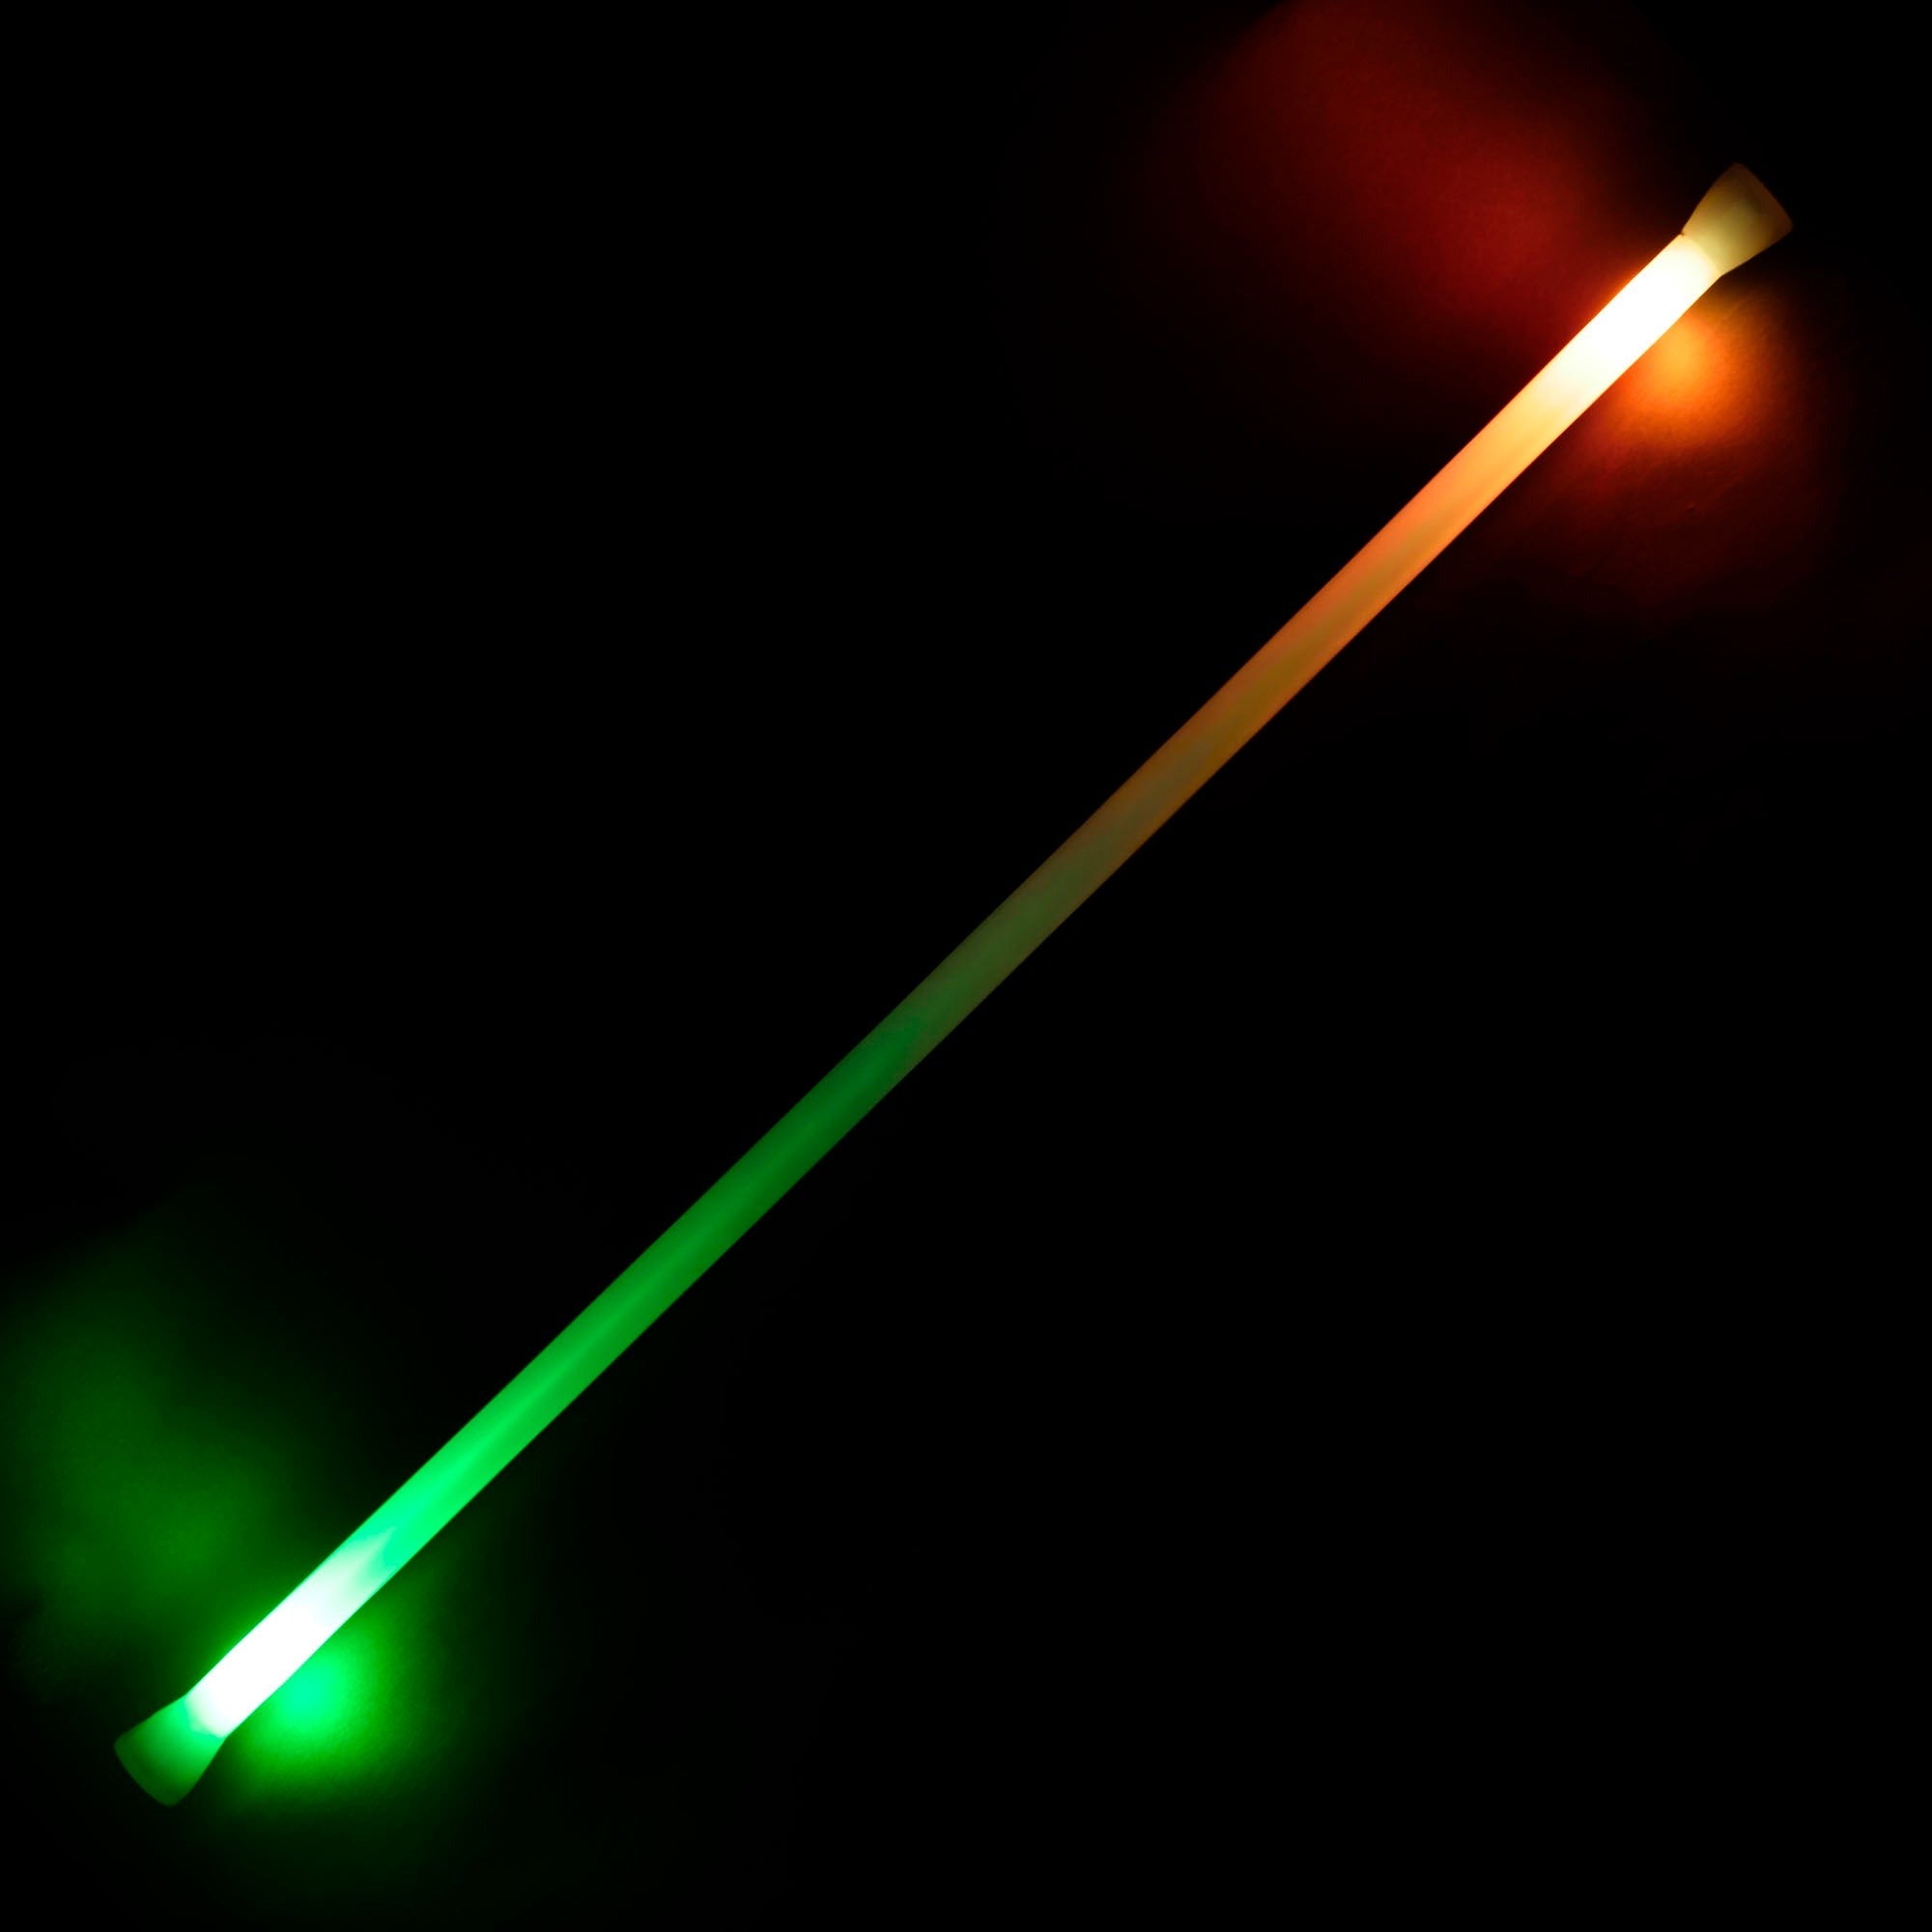 echo spin staff with orange and green glowing lights